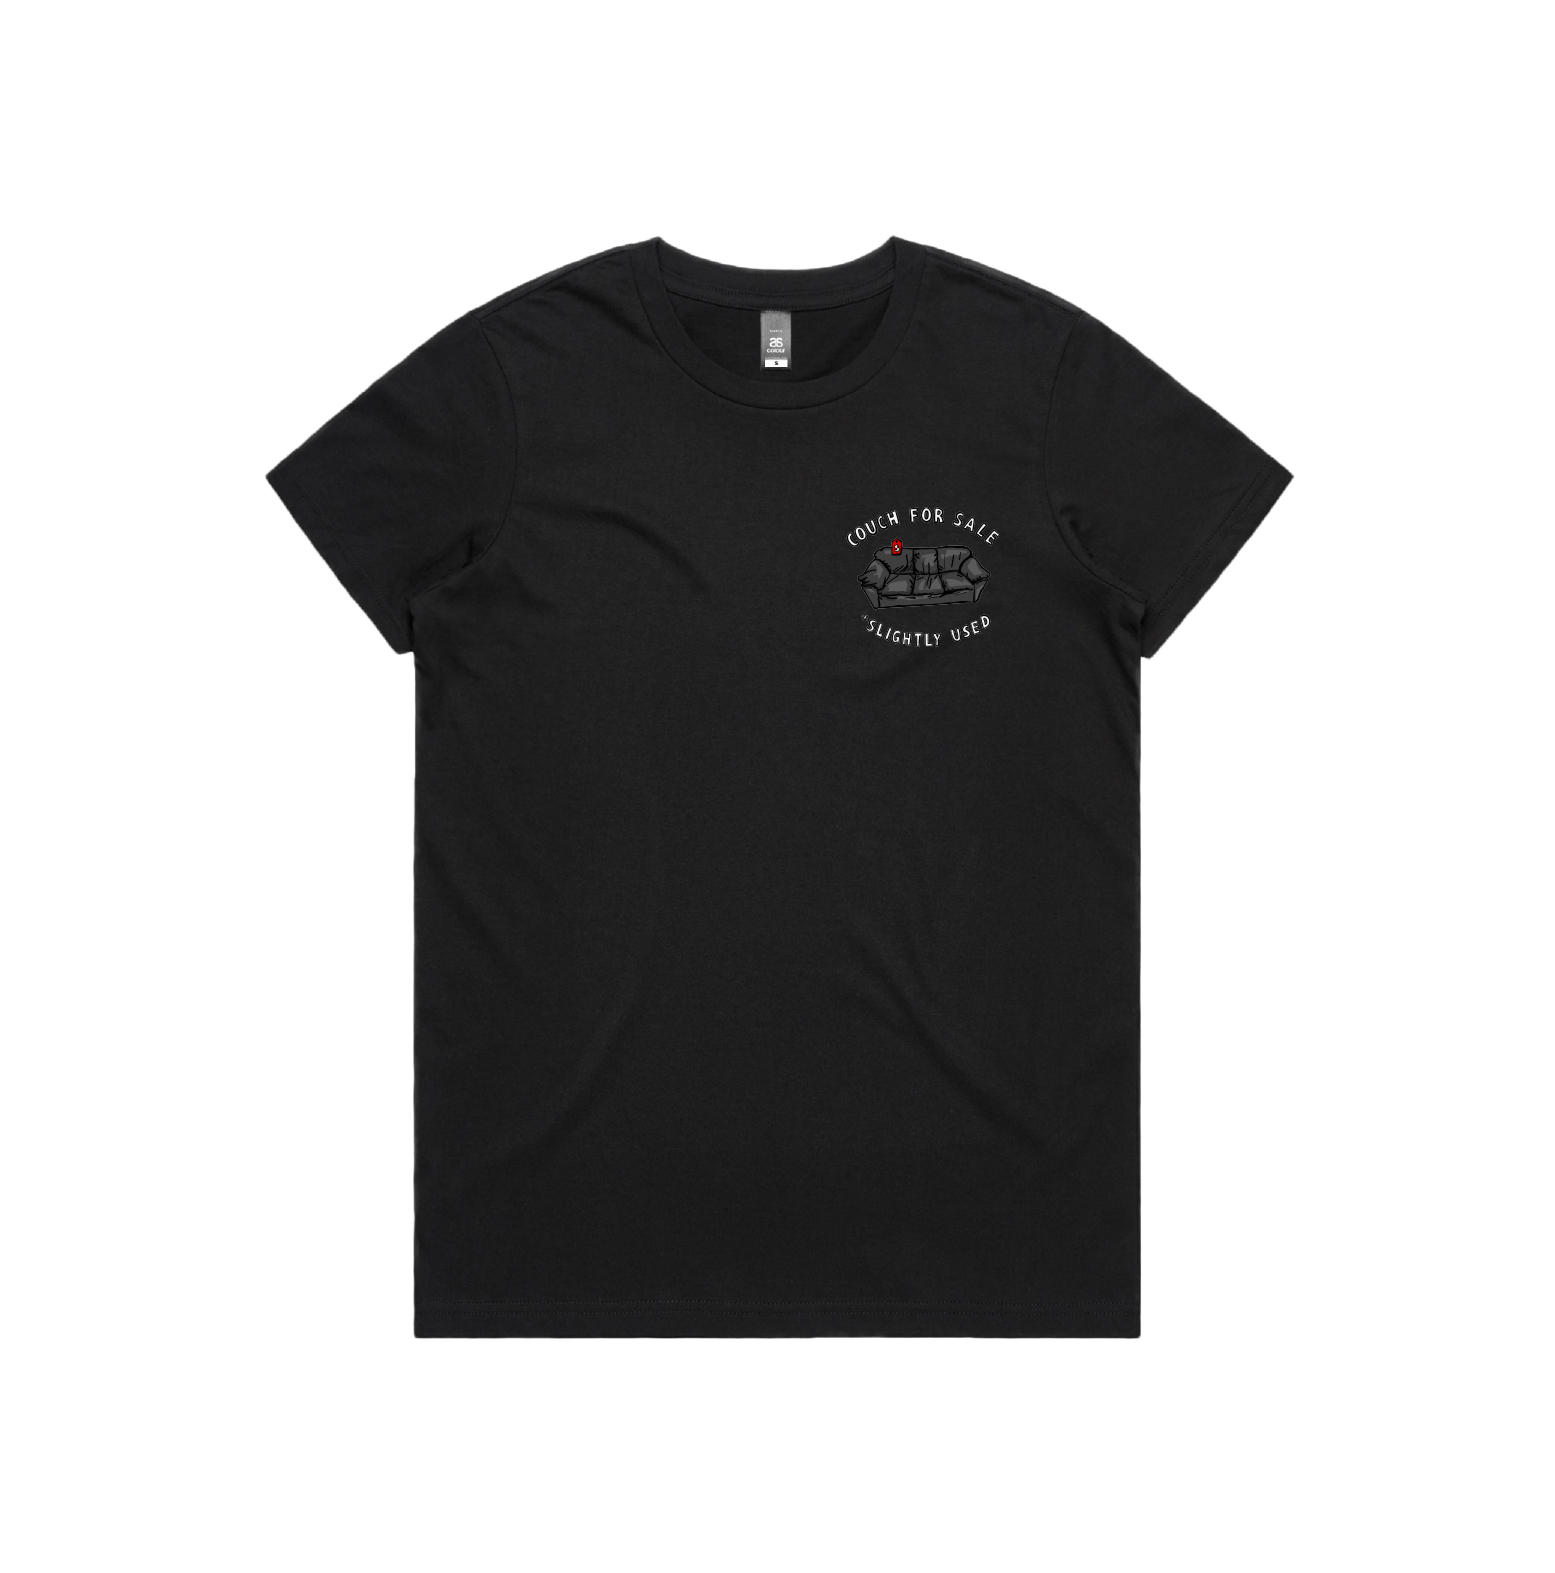 XS / Black / Small Front Design Casting Couch 📹 - Women's T Shirt